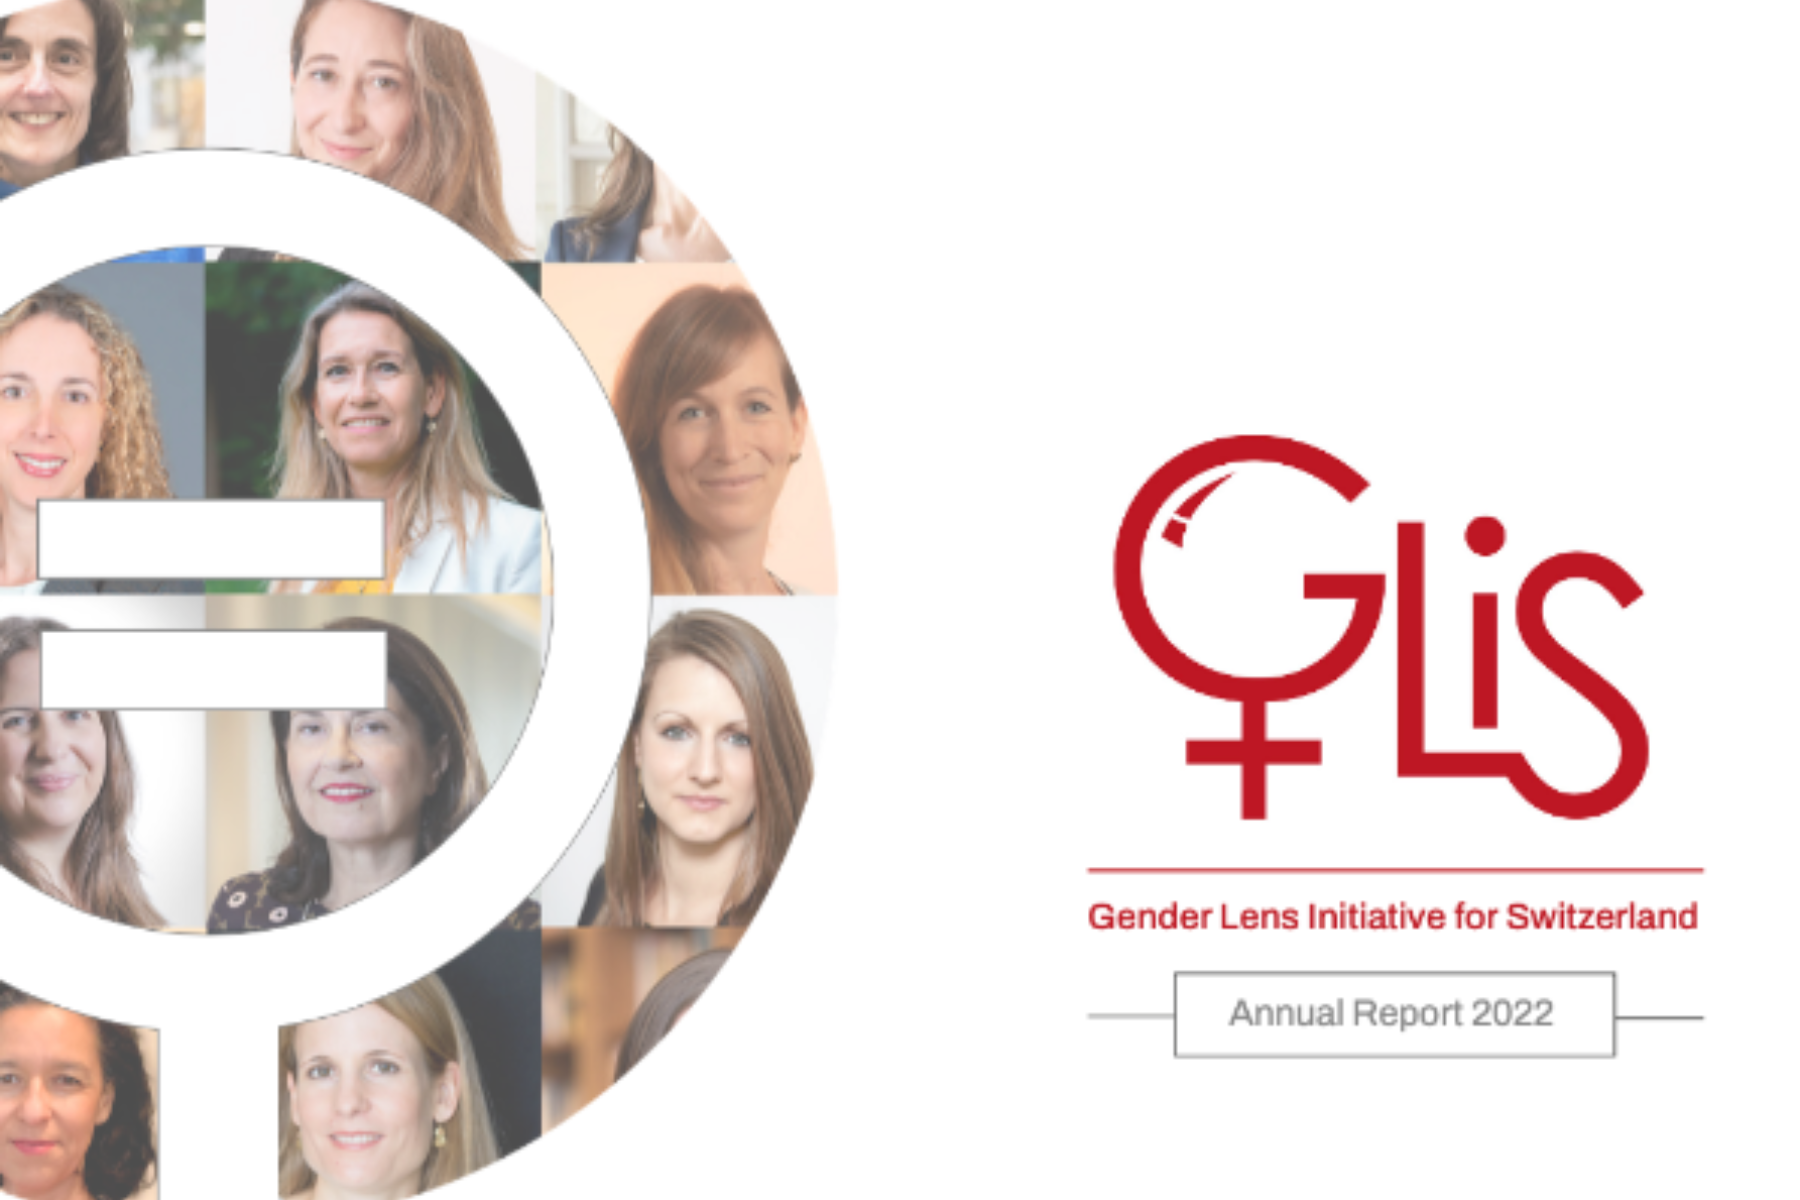 Gender Lens Initiative for Switzerland Publishes Second Annual Report